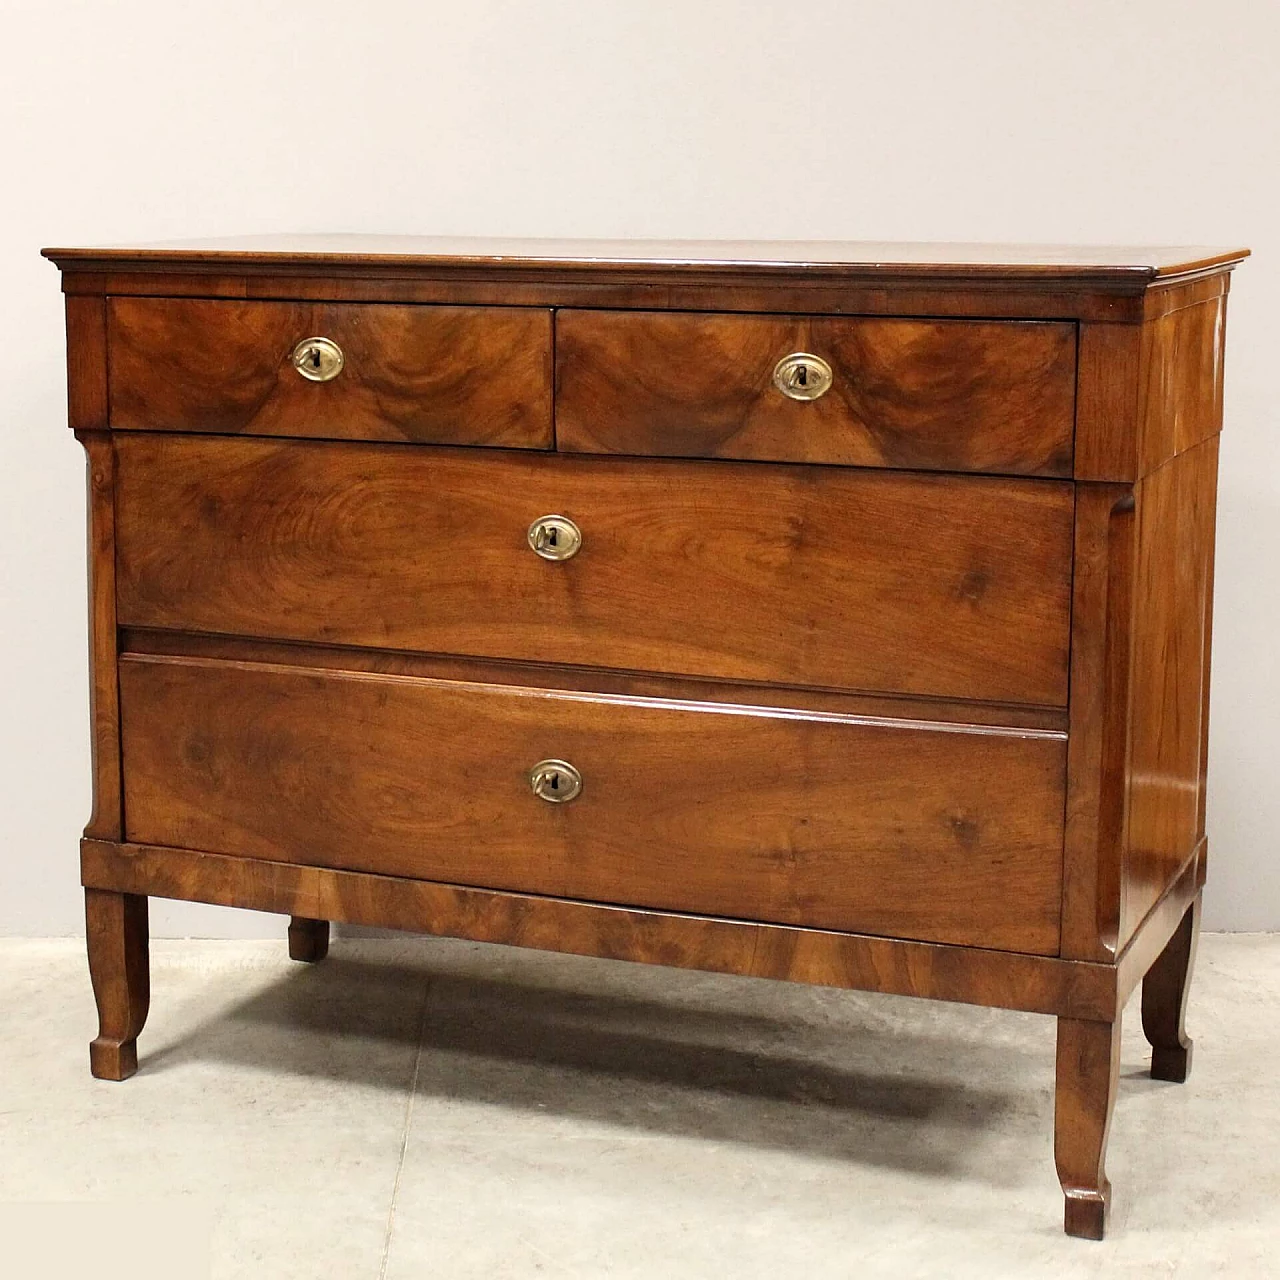 Direttorio chest of drawers in solid walnut and walnut panelling, second half of the 18th century 10